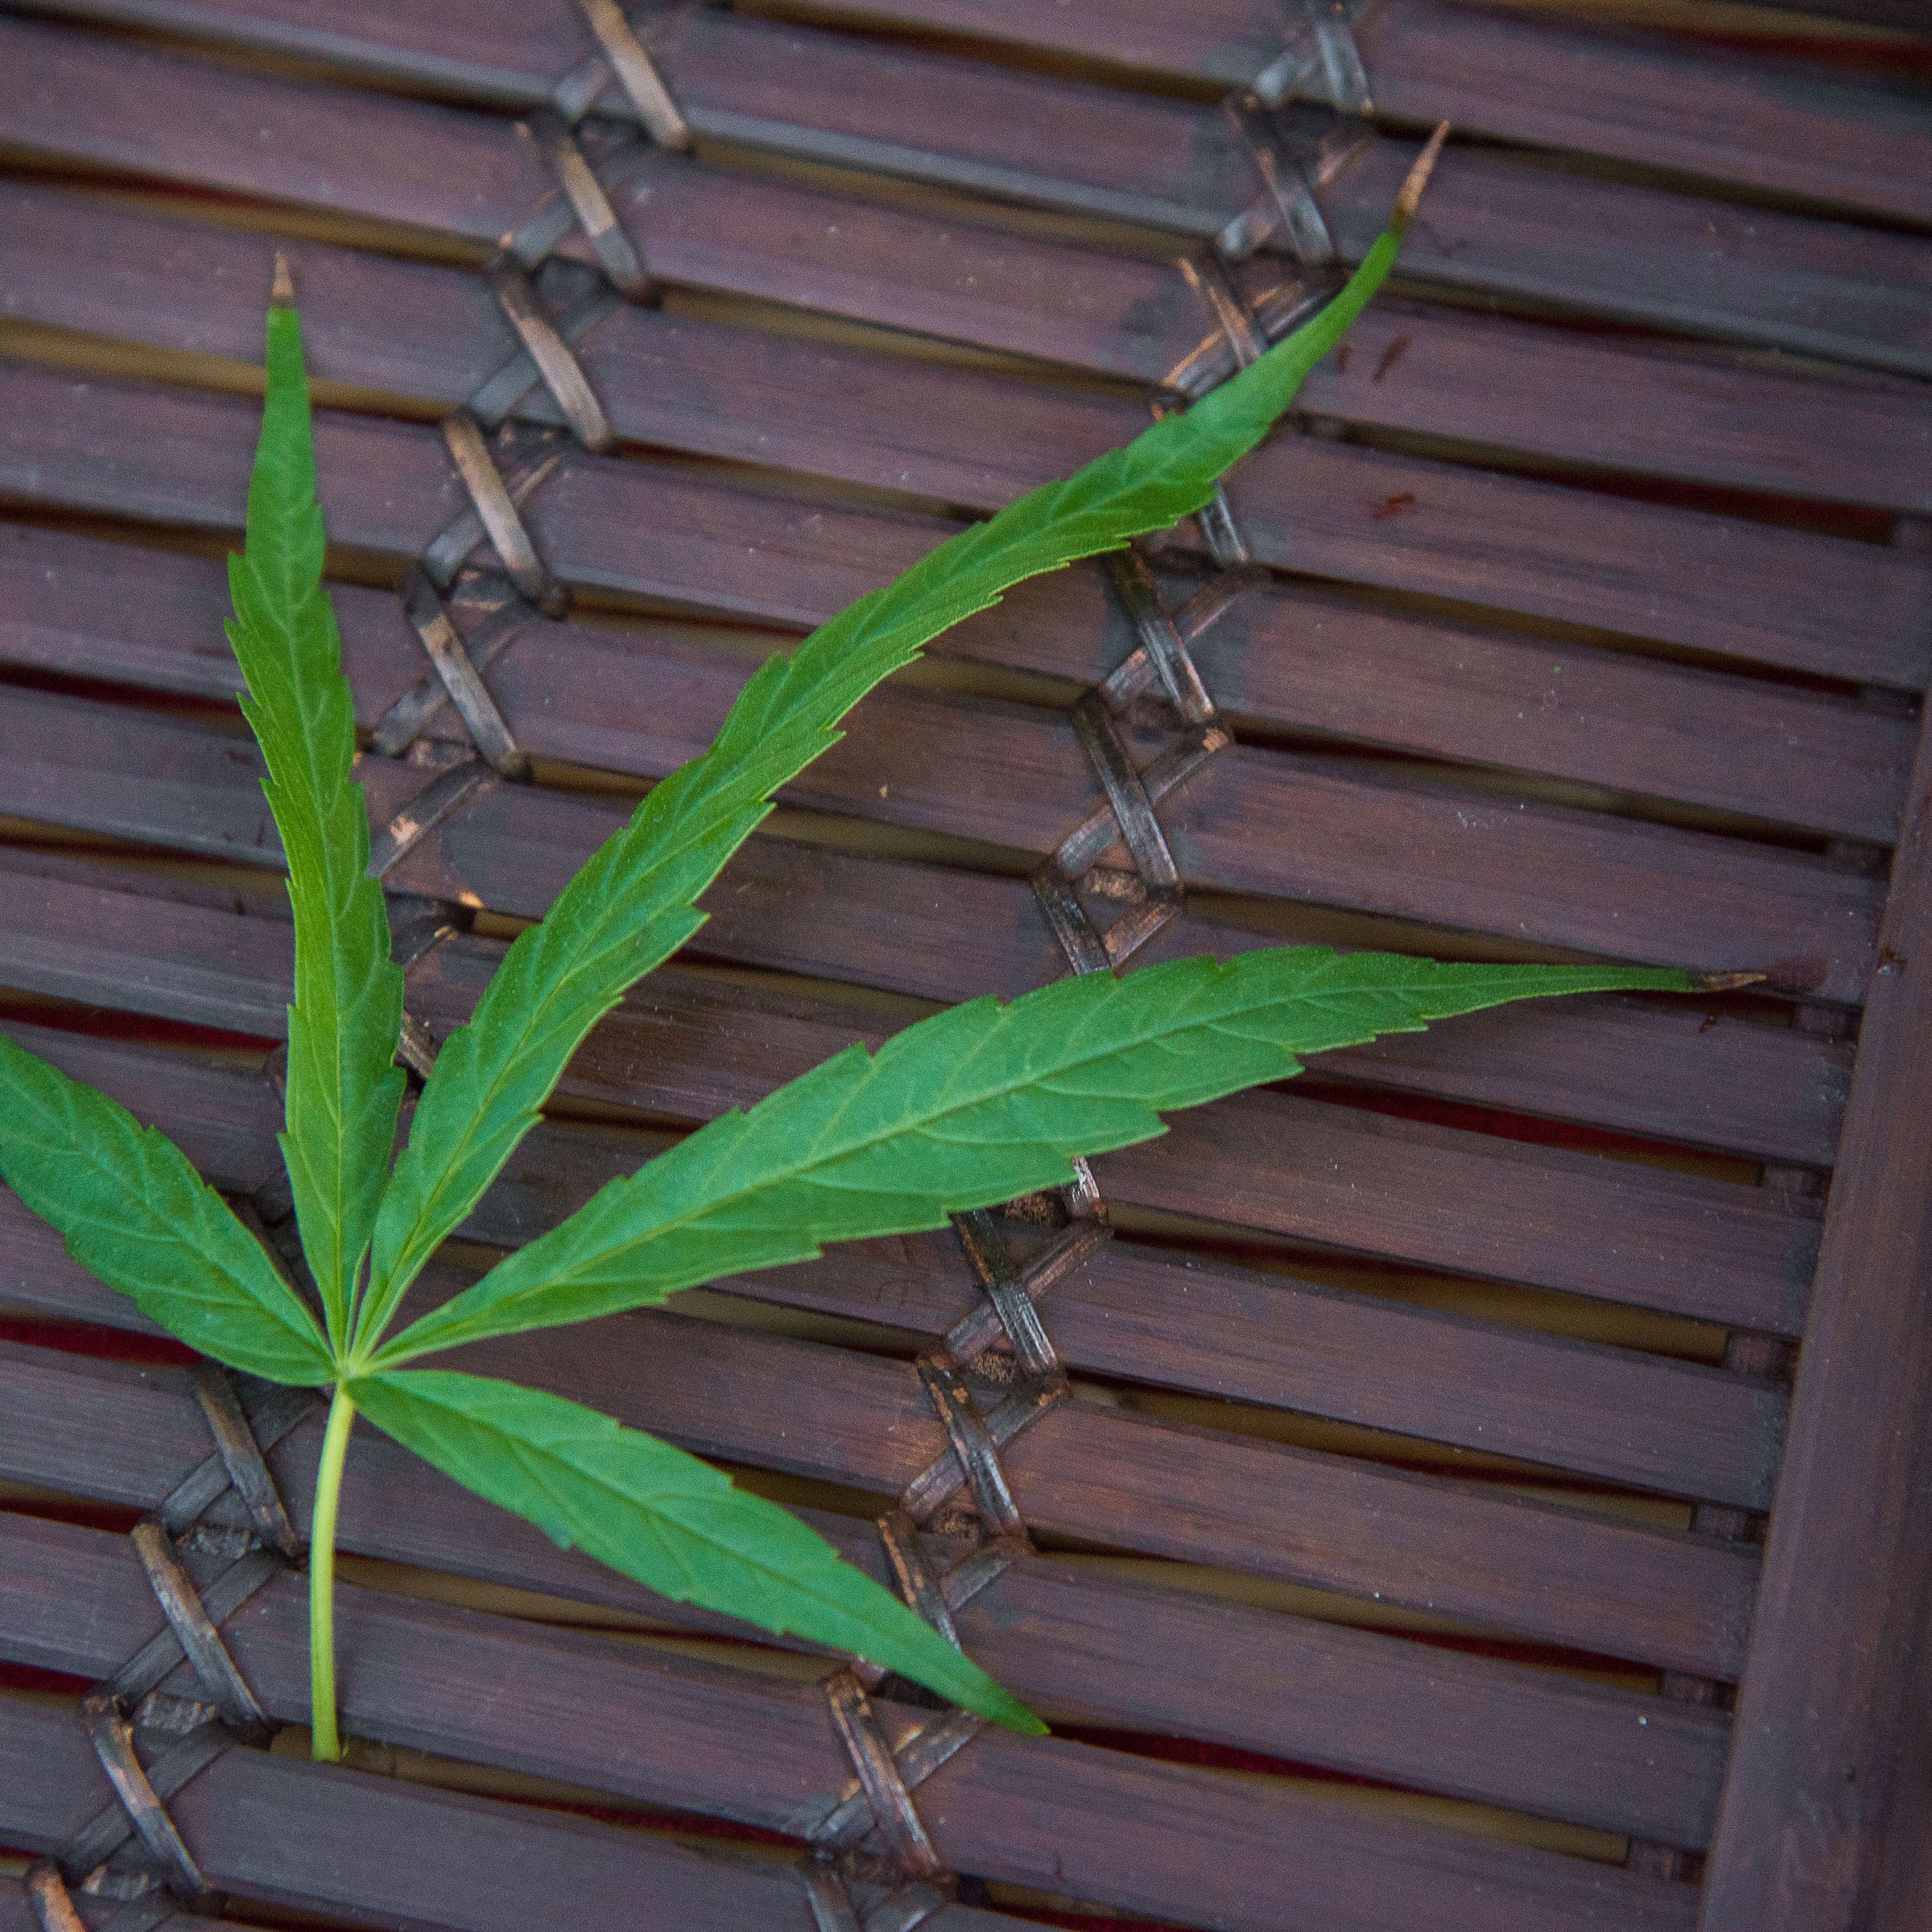 A cannabis leaf seen in a basket on a table during the “...